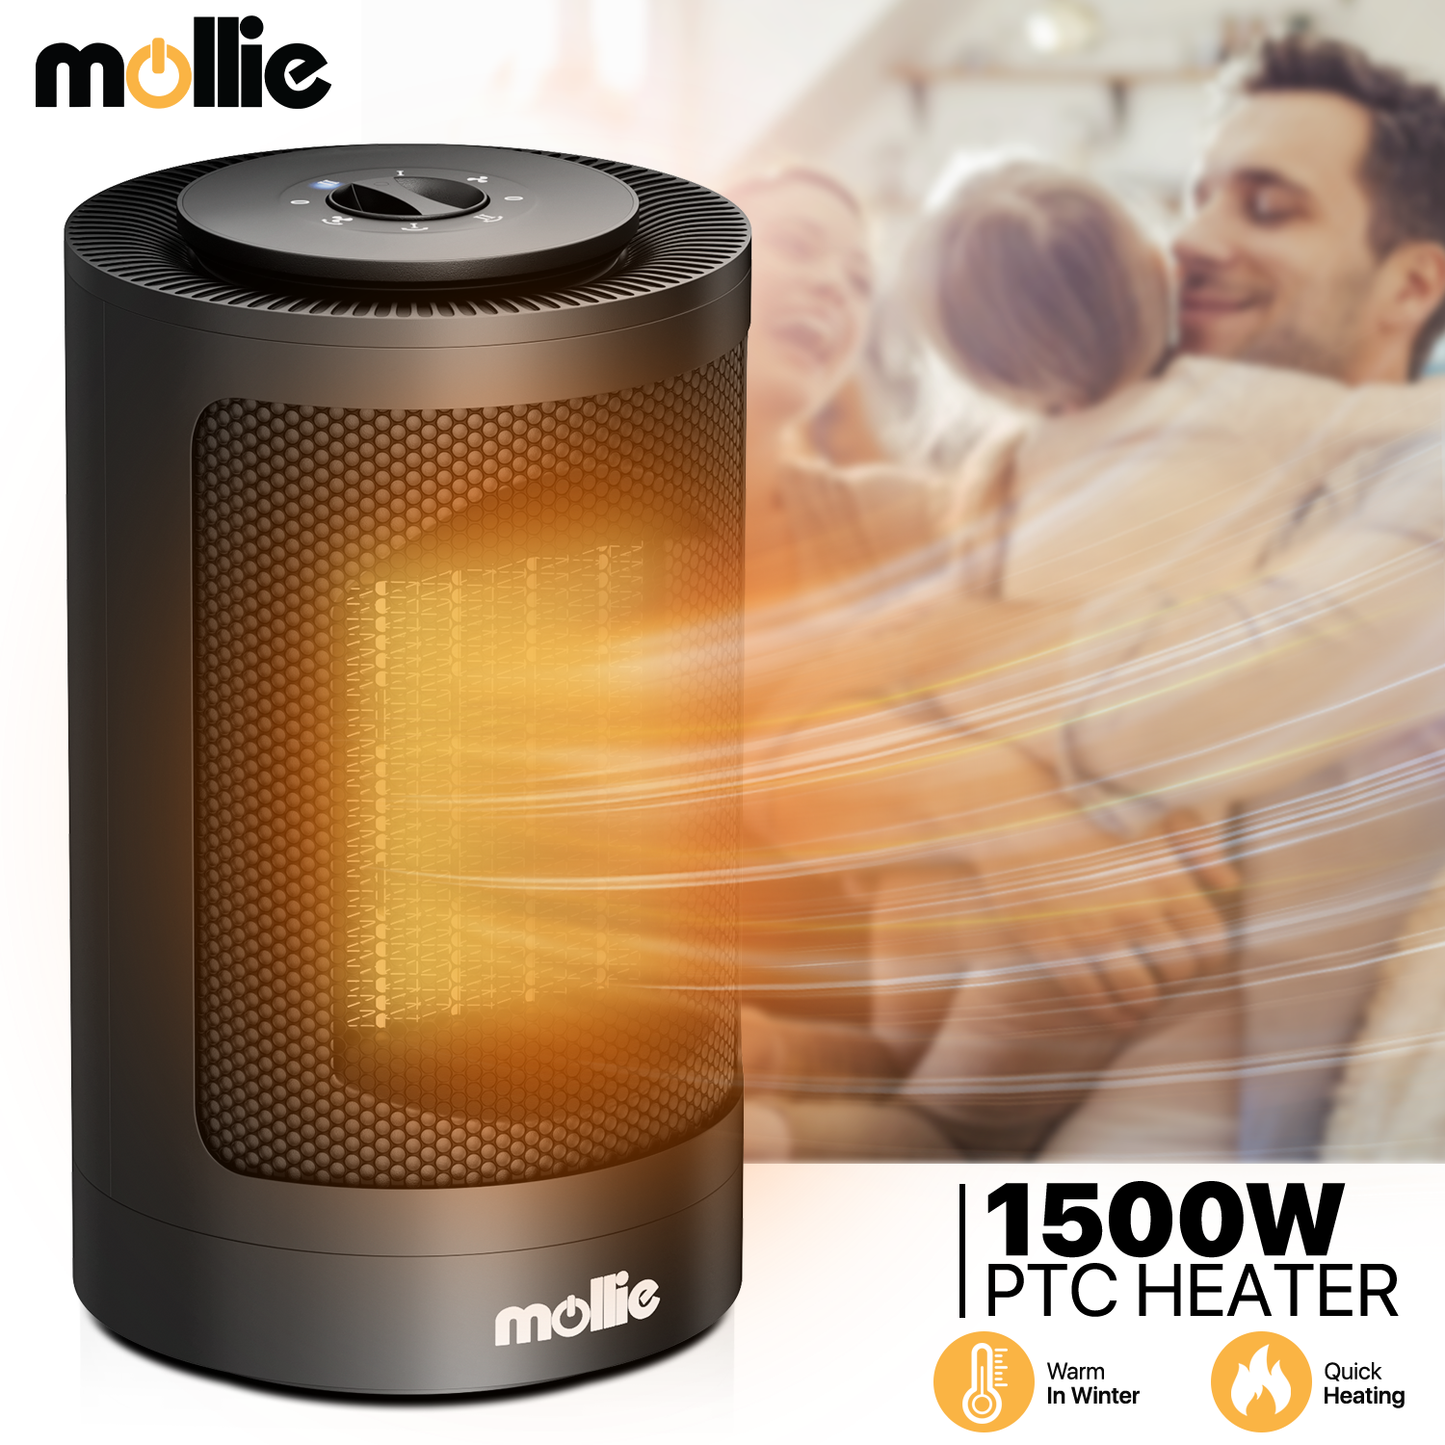 1500W Electric 3 Modes Cylindrical PTC 160 sq.ft Space Heater